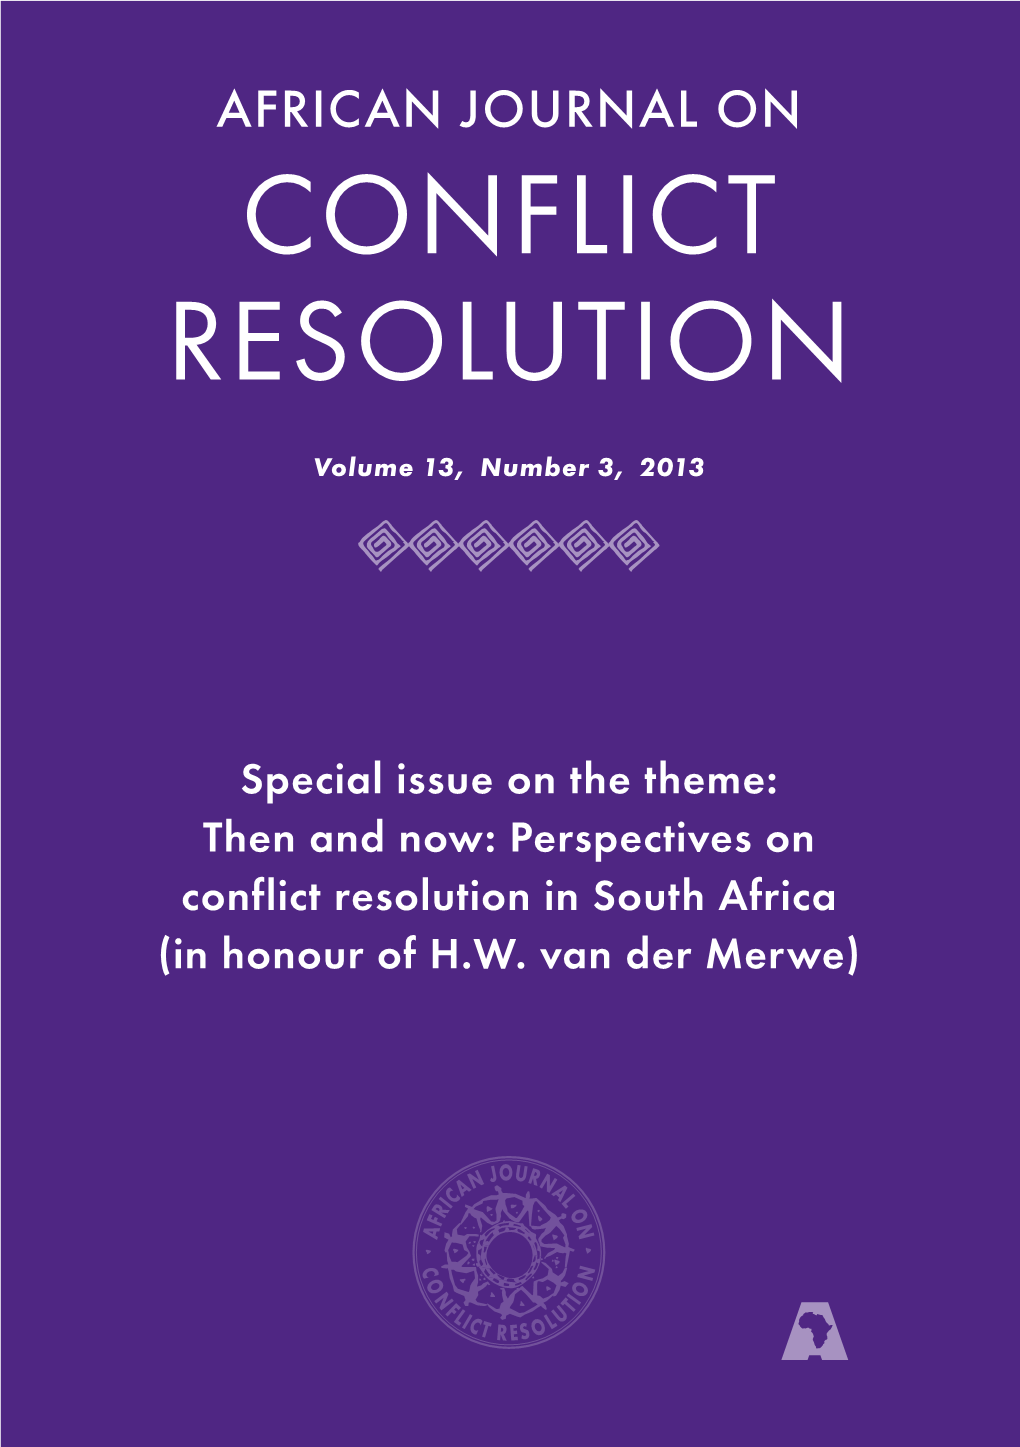 Perspectives on Conflict Resolution in South Africa (In Honour of H.W